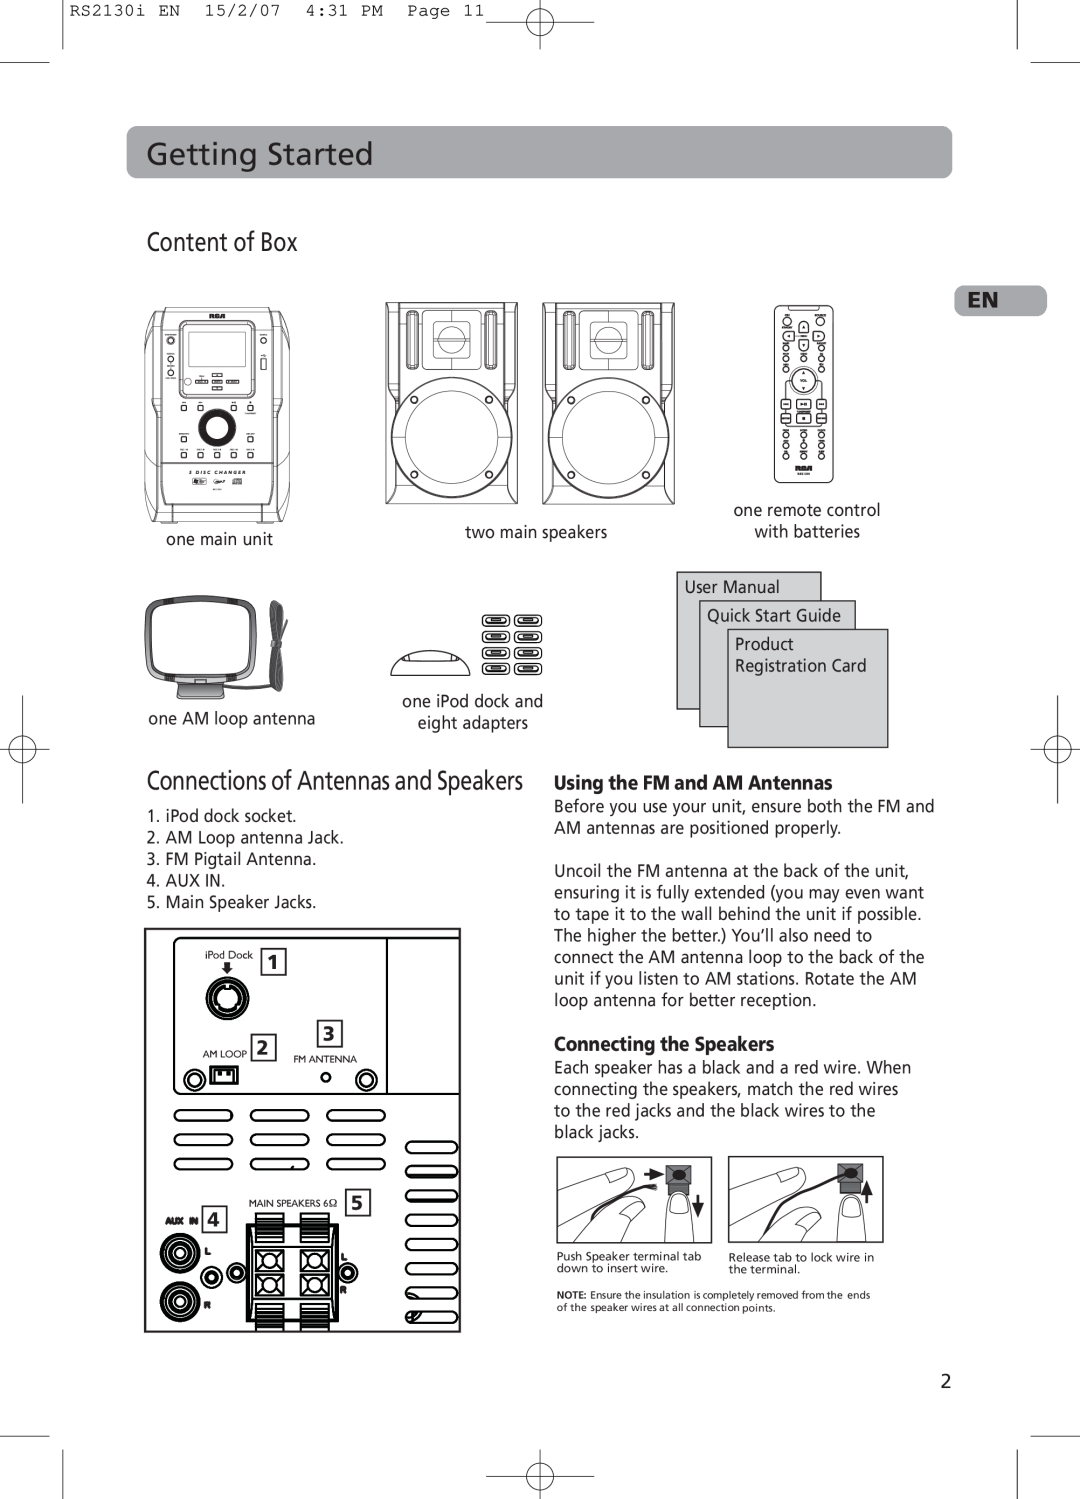 RCA RS2130i user manual Getting Started, Content of Box, Using the FM and AM Antennas, Connecting the Speakers 